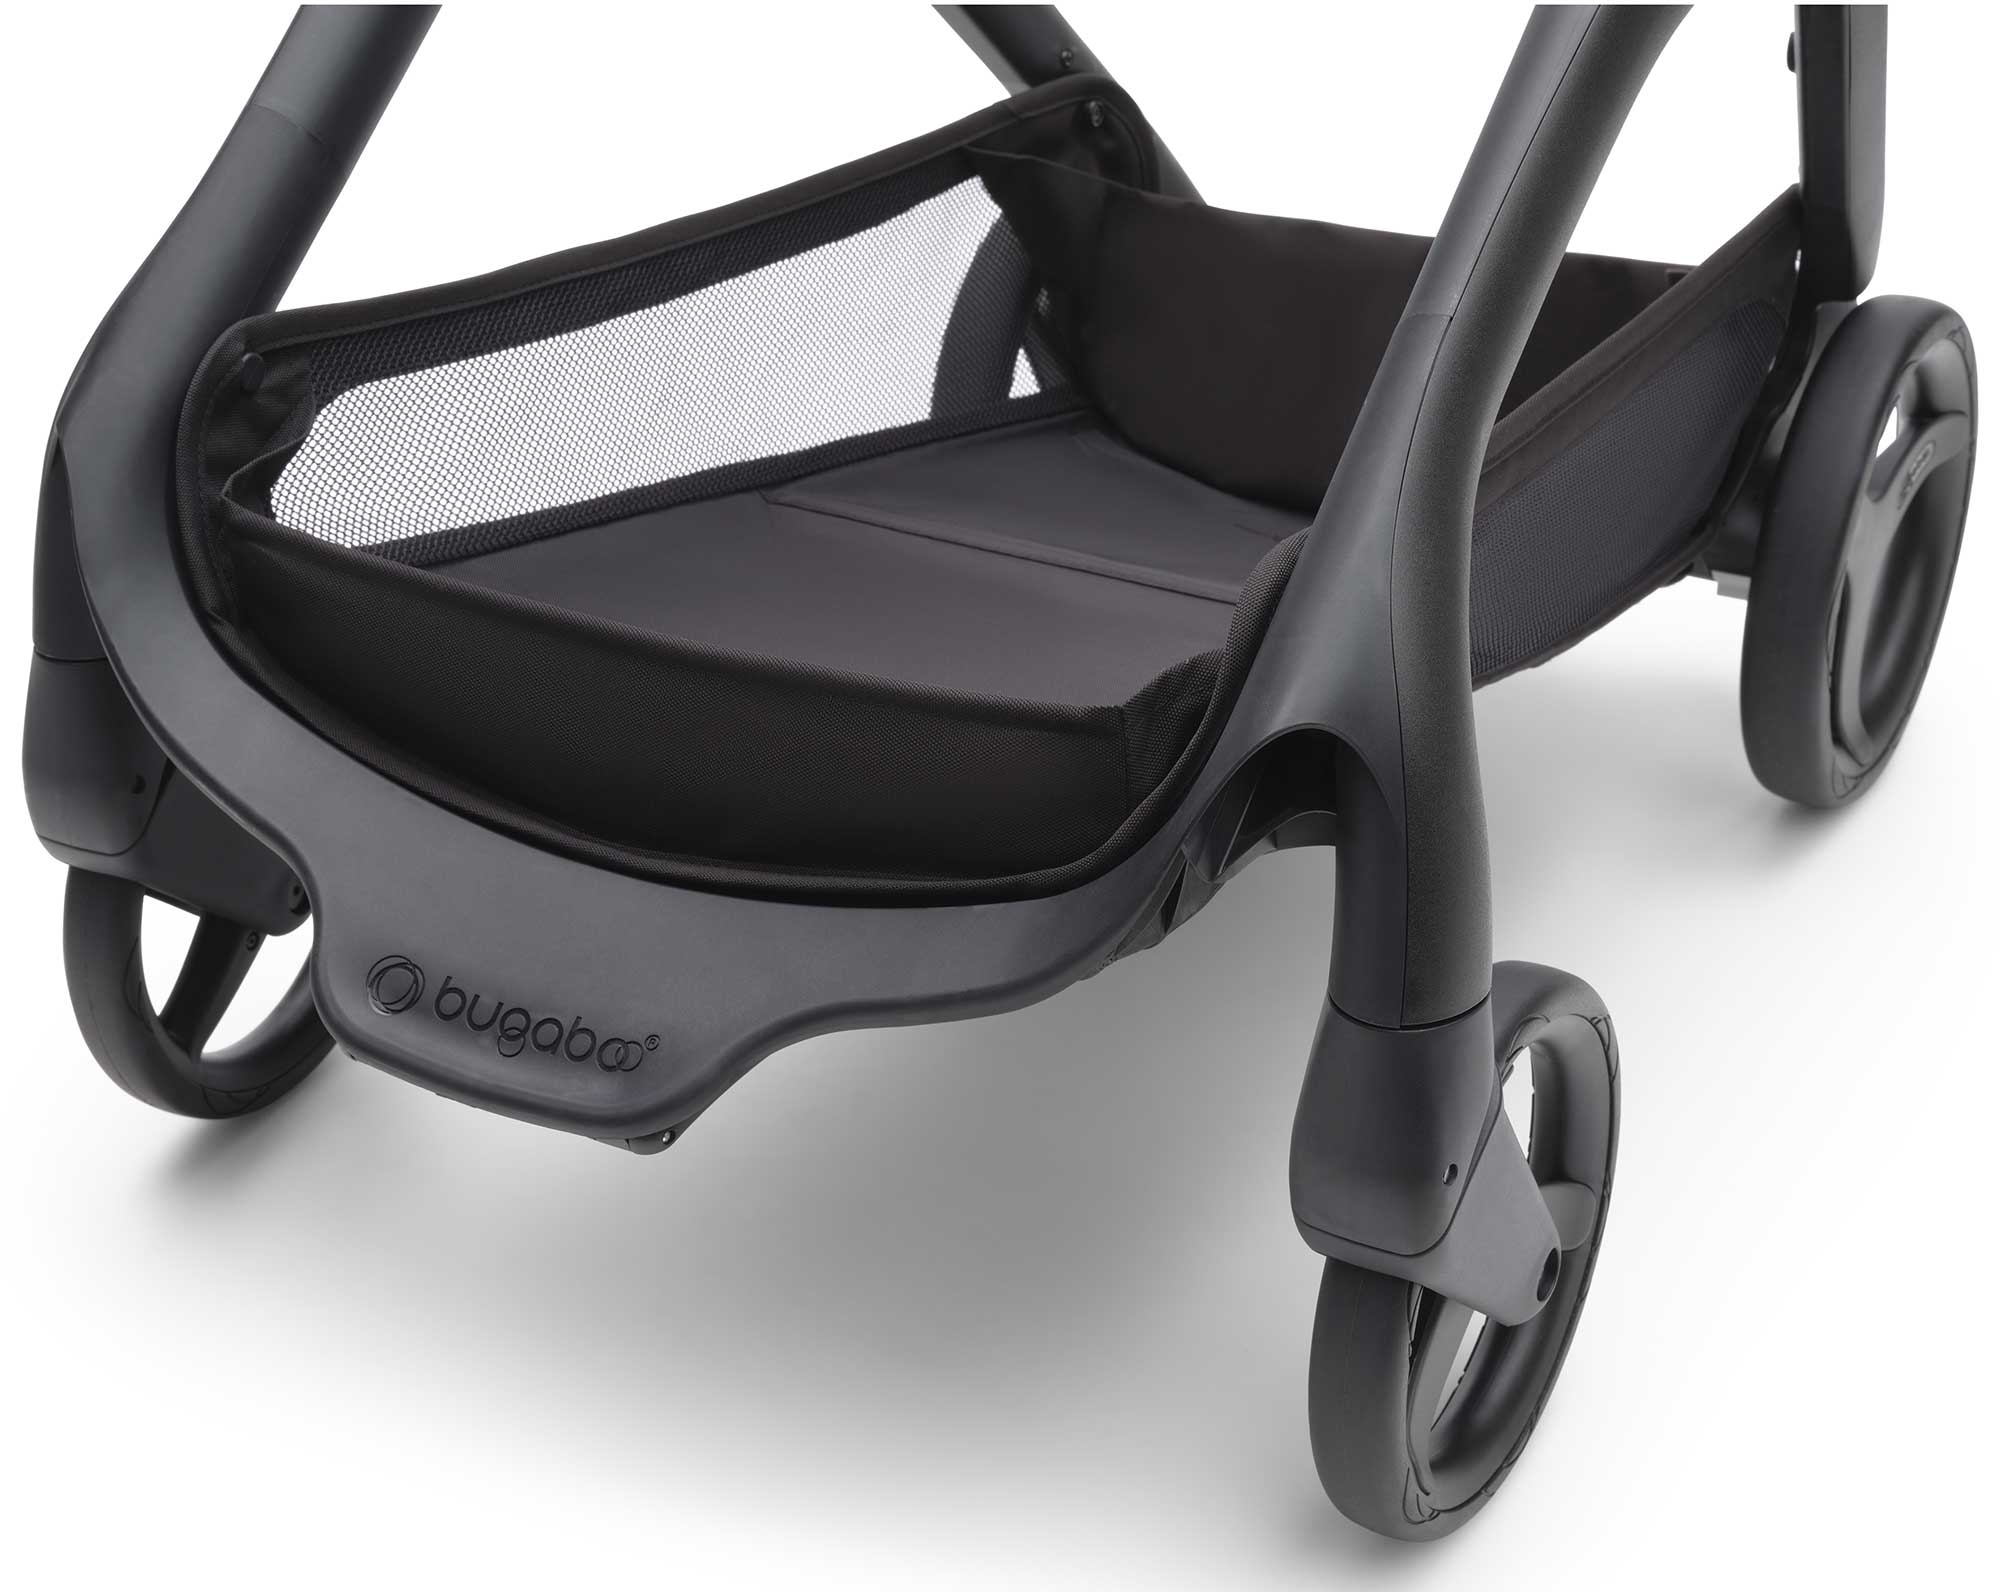 Bugaboo Travel Systems Bugaboo Dragonfly Ultimate Bundle - Black/Midnight Black 13809-BLK-MID-BLK